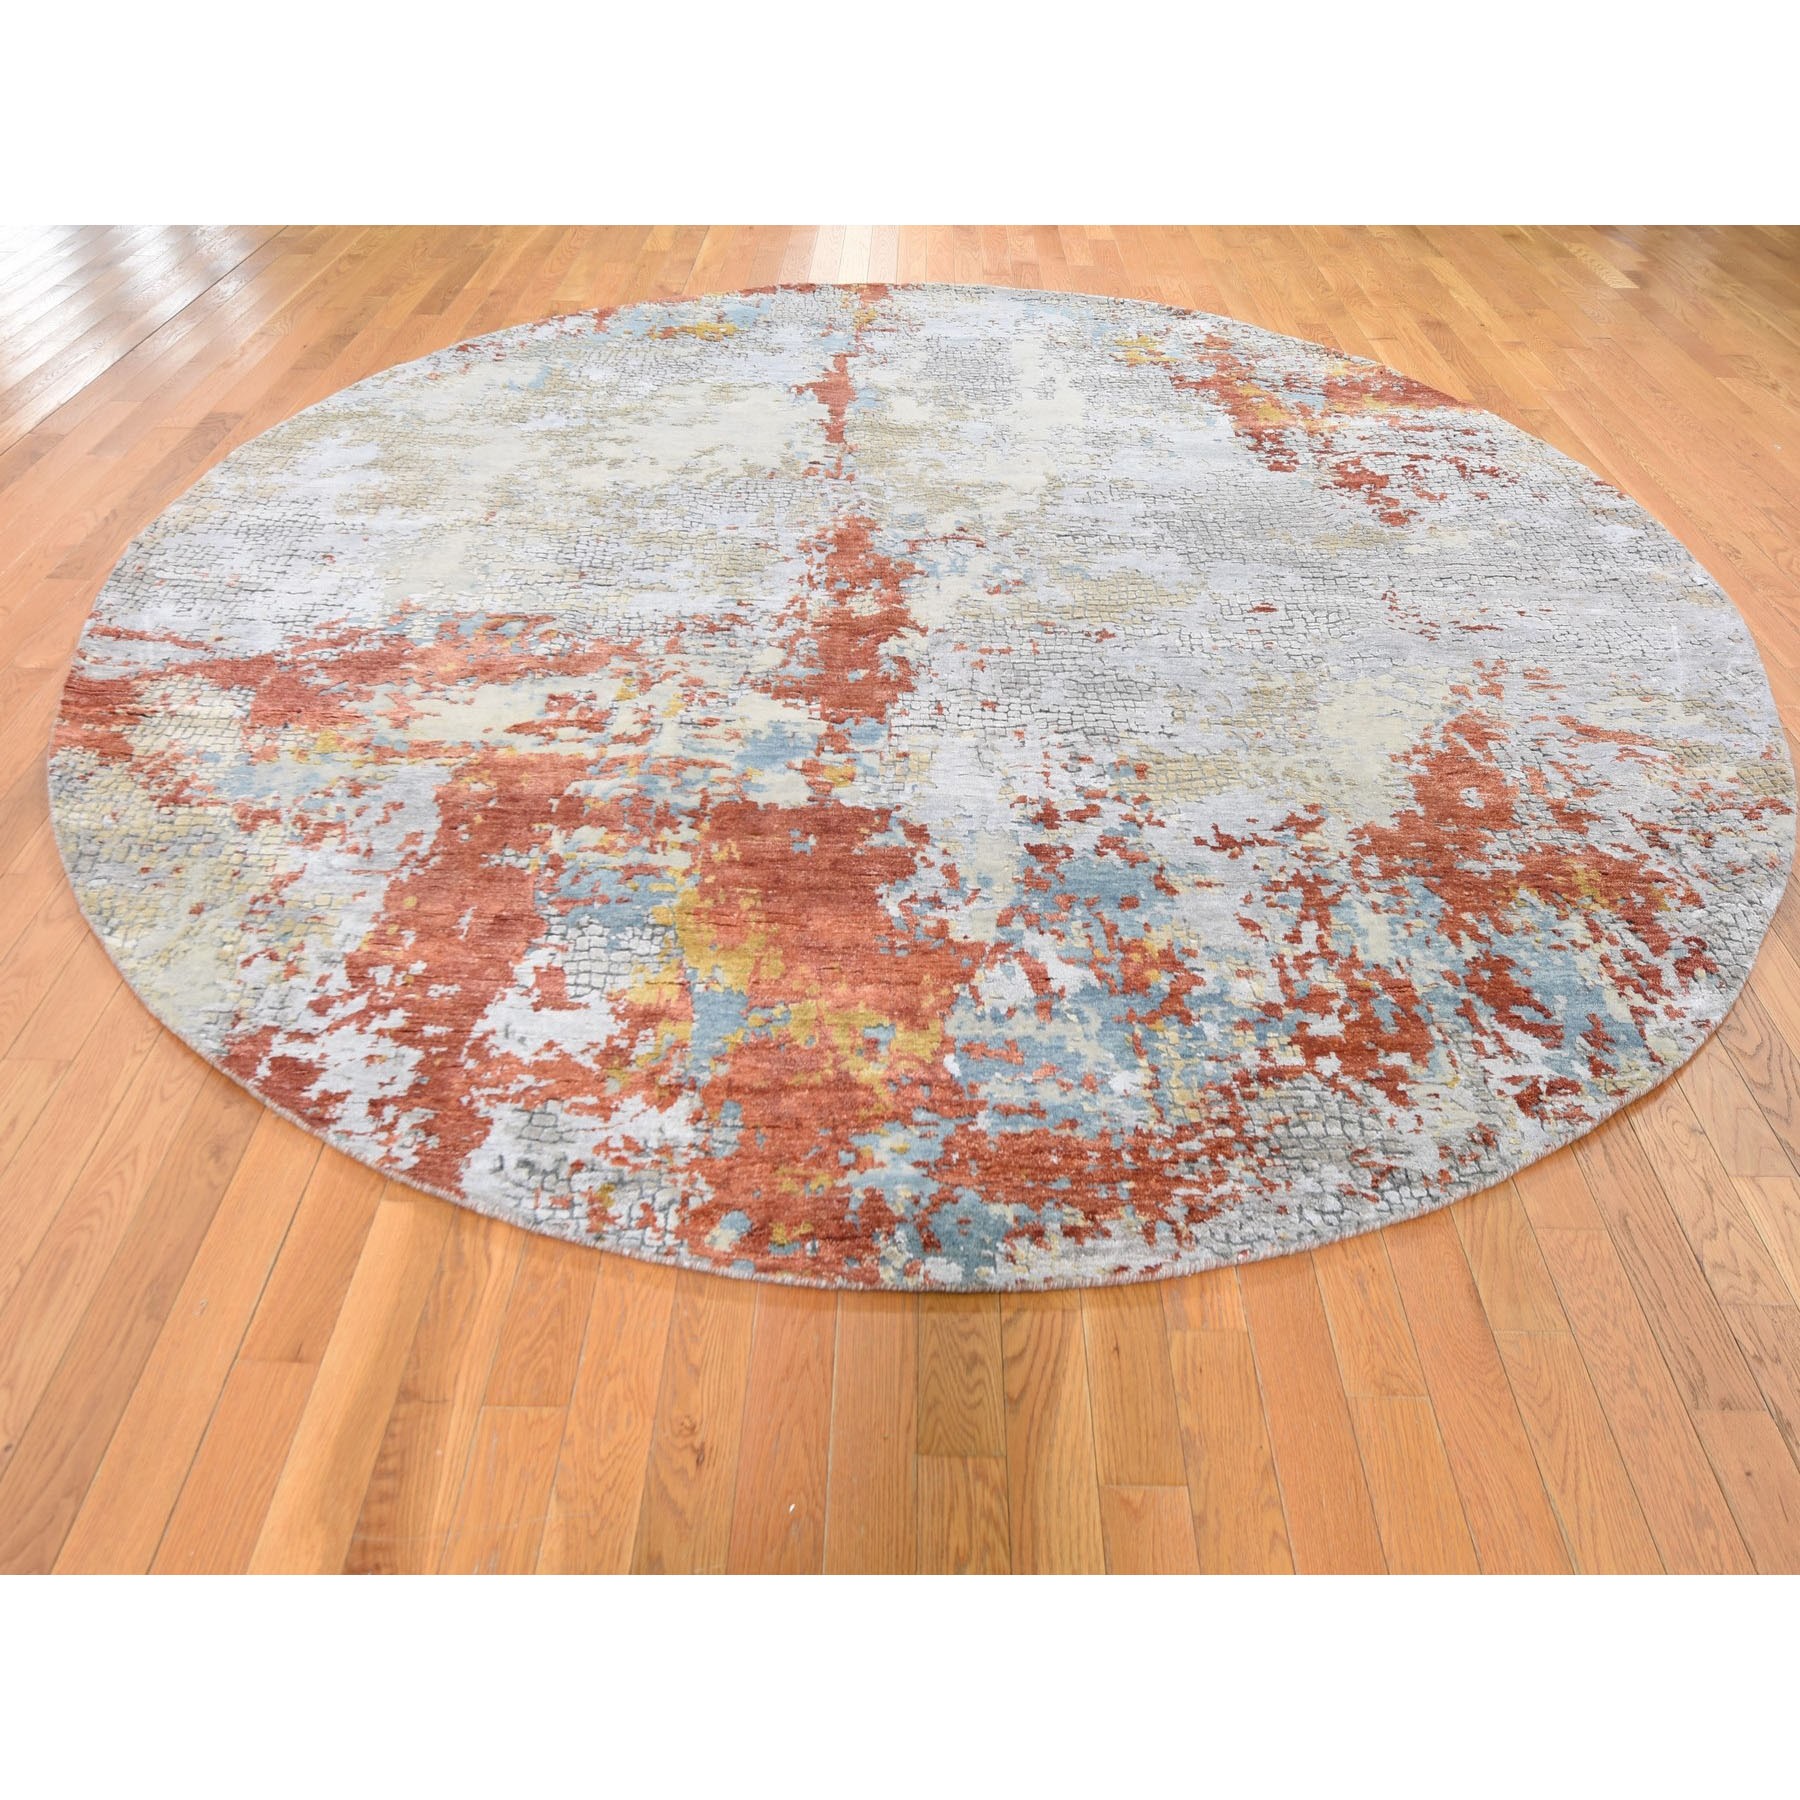 9-10-x9-10  Round Wool And Silk Abstract With Fire Mosaic Design Hand Knotted Oriental Rug 